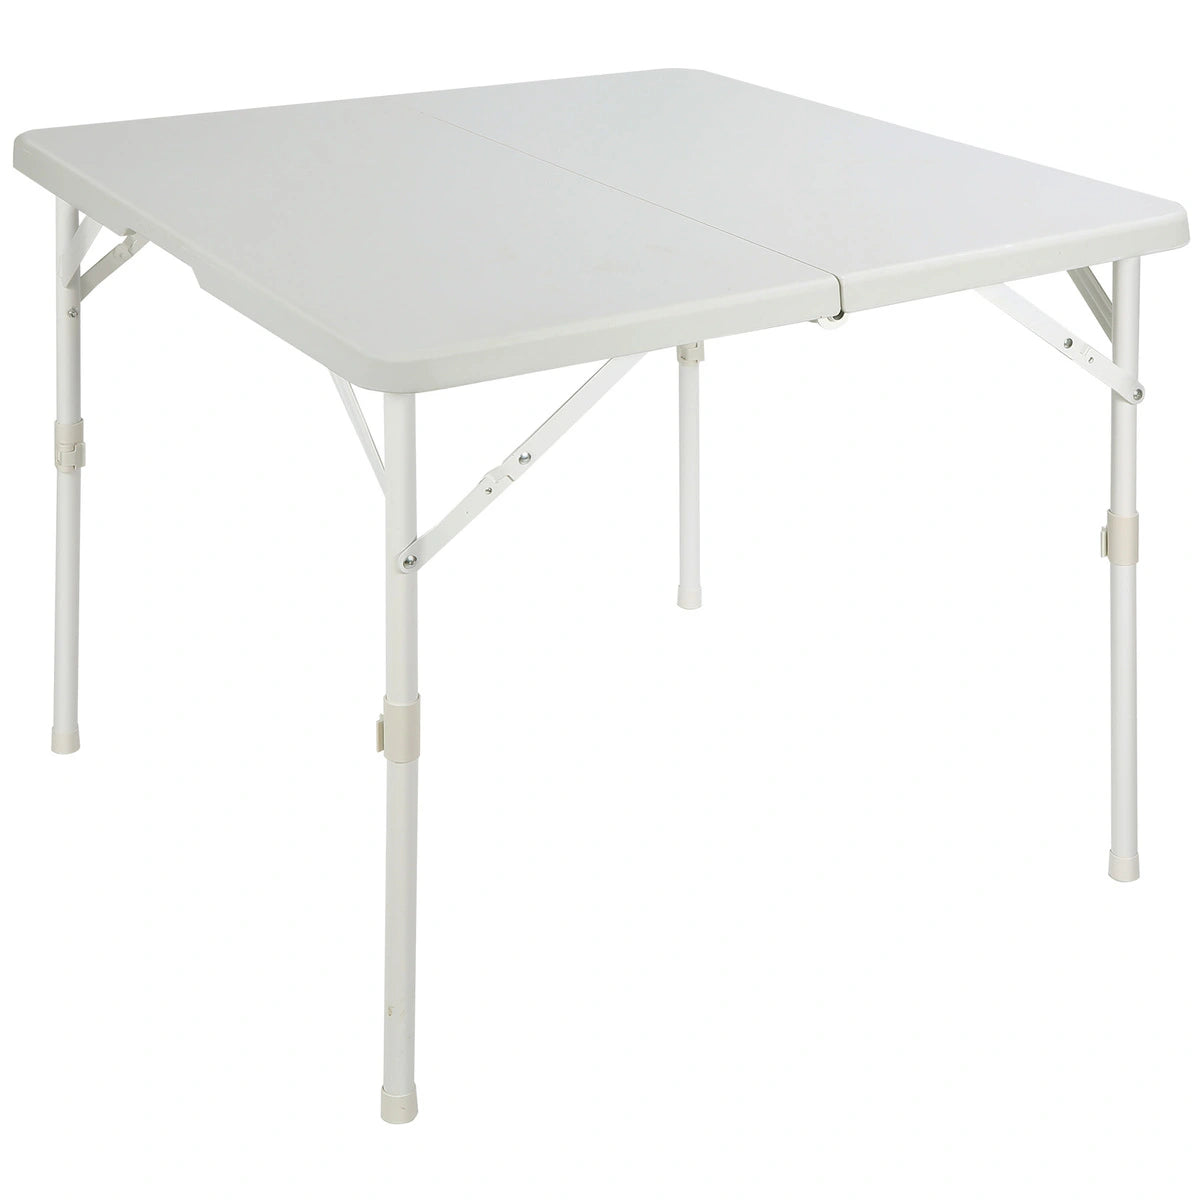 Square Folding Card Table with Collapsible Legs